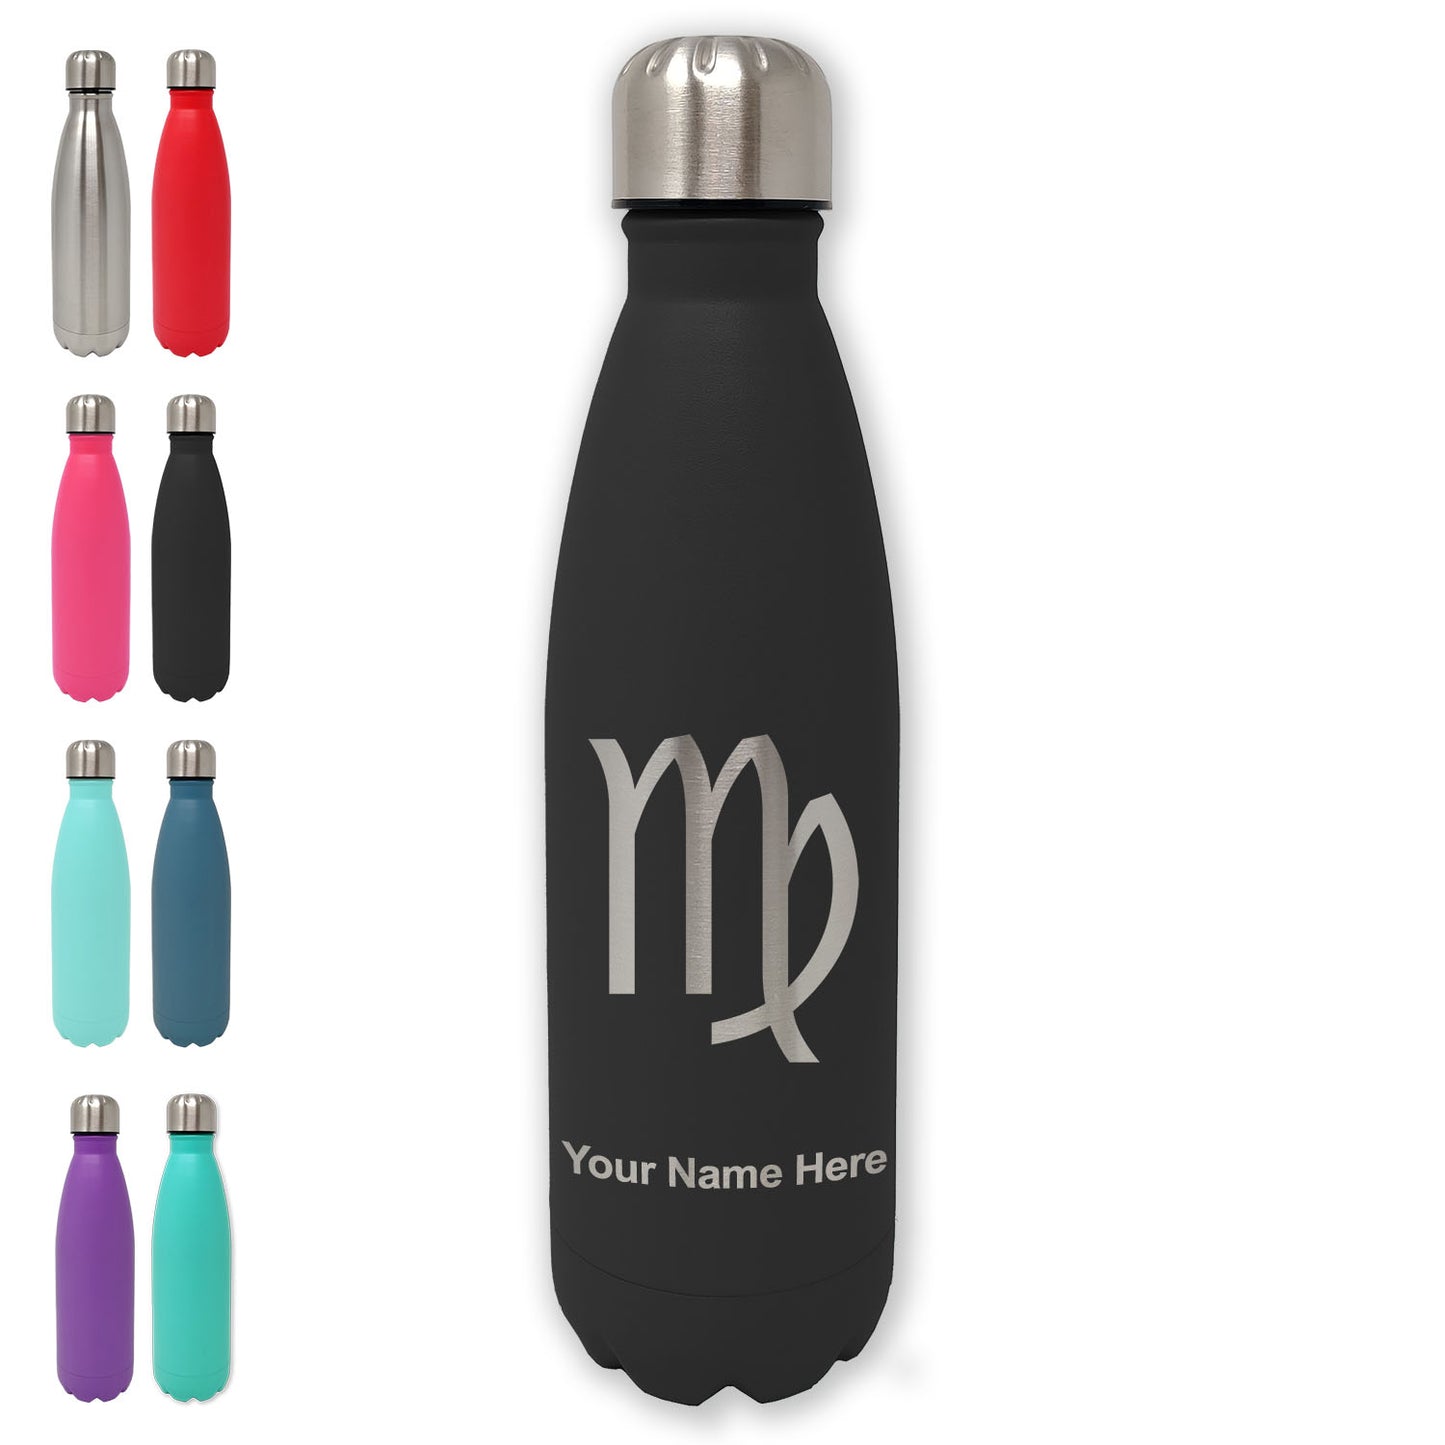 LaserGram Double Wall Water Bottle, Zodiac Sign Virgo, Personalized Engraving Included